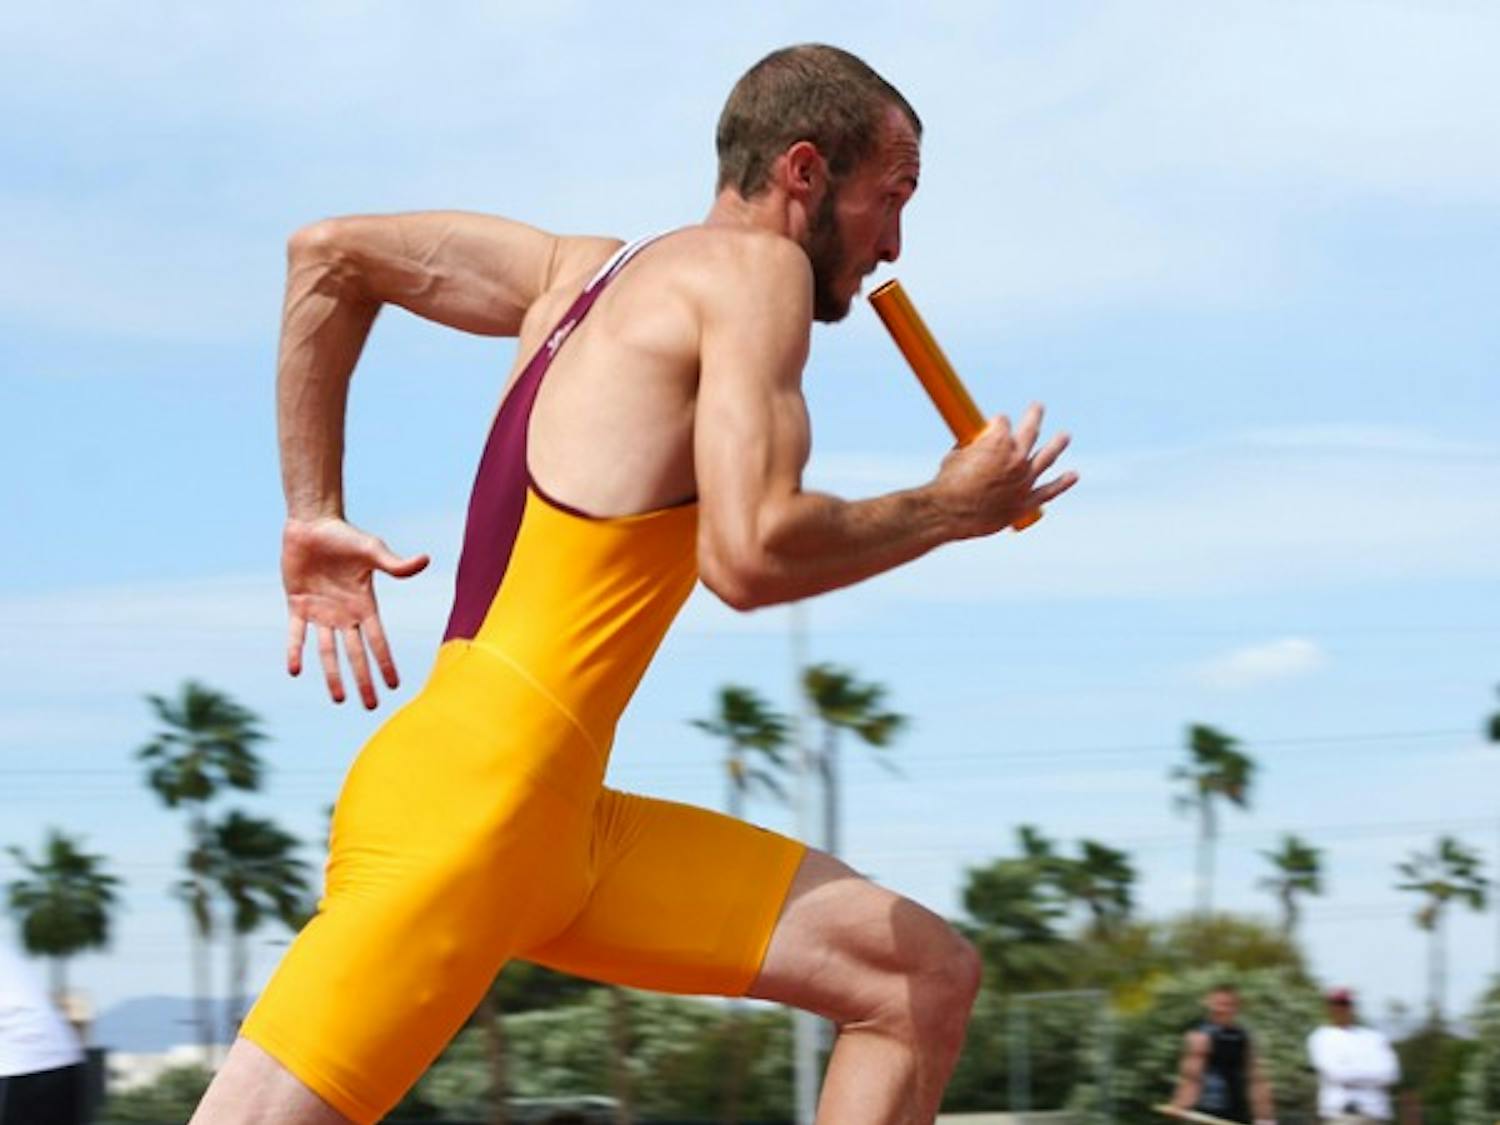 Flying high: ASU junior John Kline runs his leg of the 4x400m relay during the Sun Devil Open on April 23. Both the men’s and women’s track teams upset higher-ranked UA teams at the Double Dual on Saturday. (Photo by Lisa Bartoli)